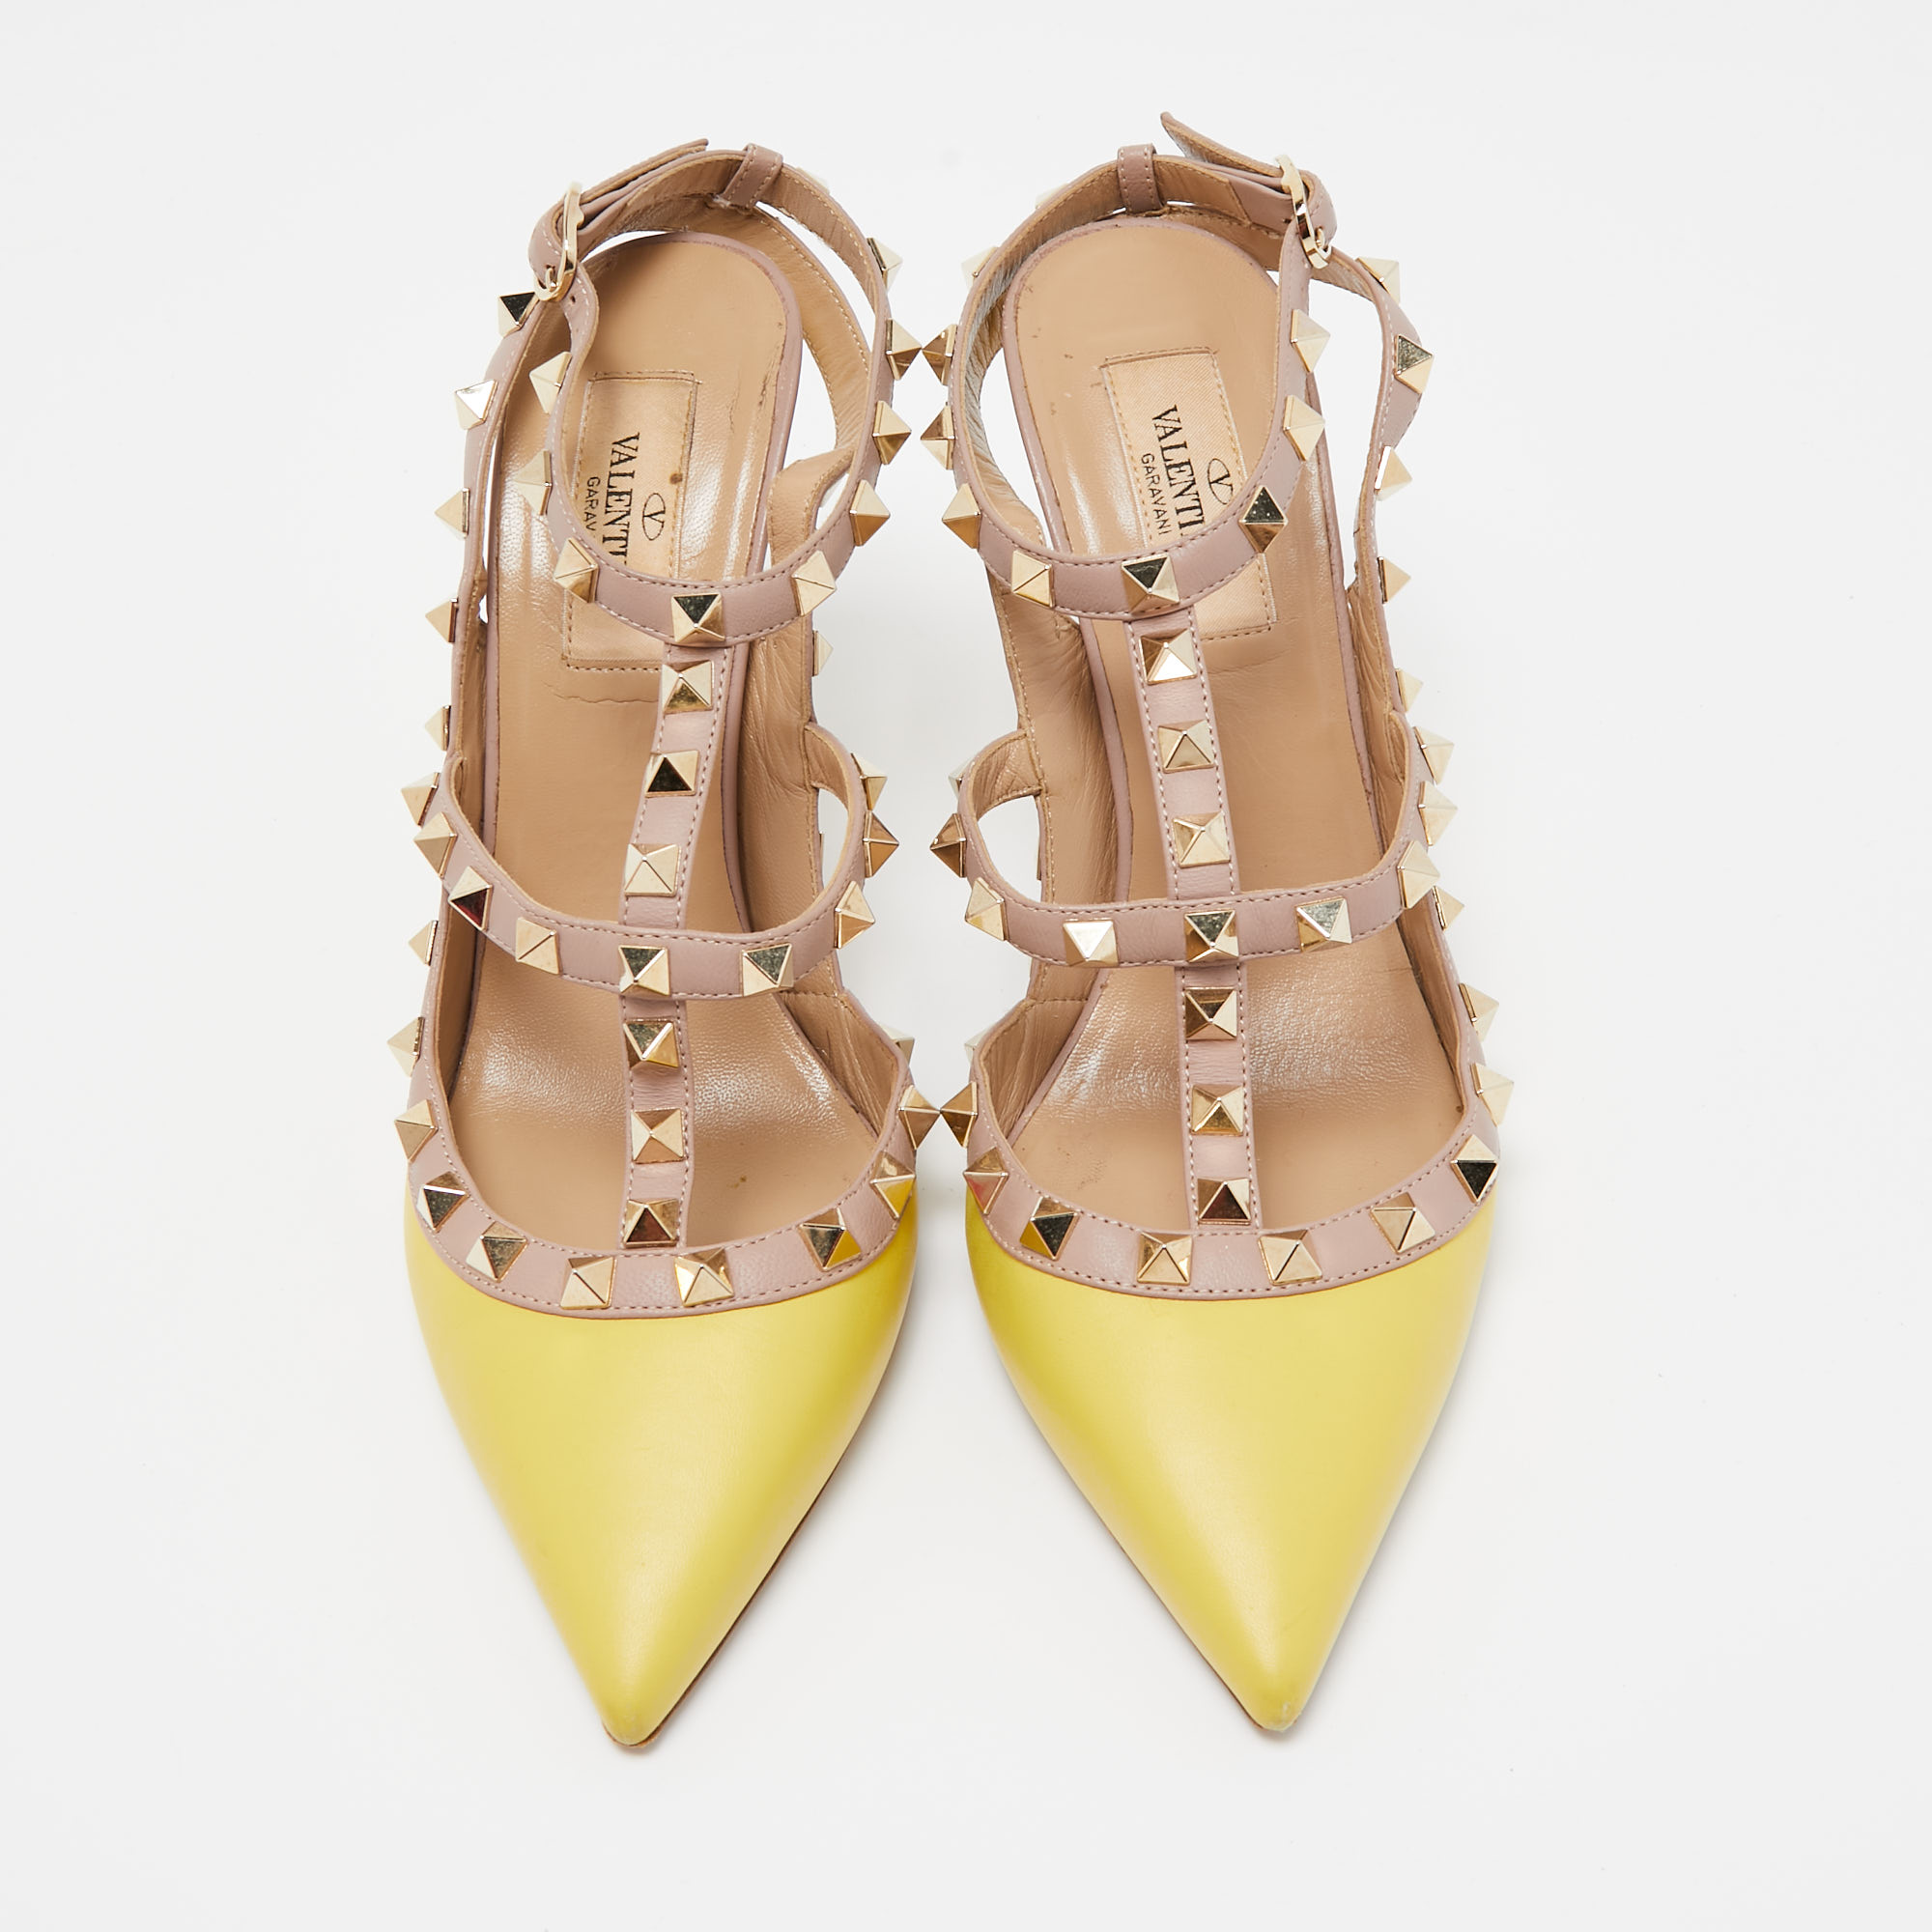 Valentino Yellow/Dusty Pink Leather Rockstud Ankle Strap Pumps Size 38.5